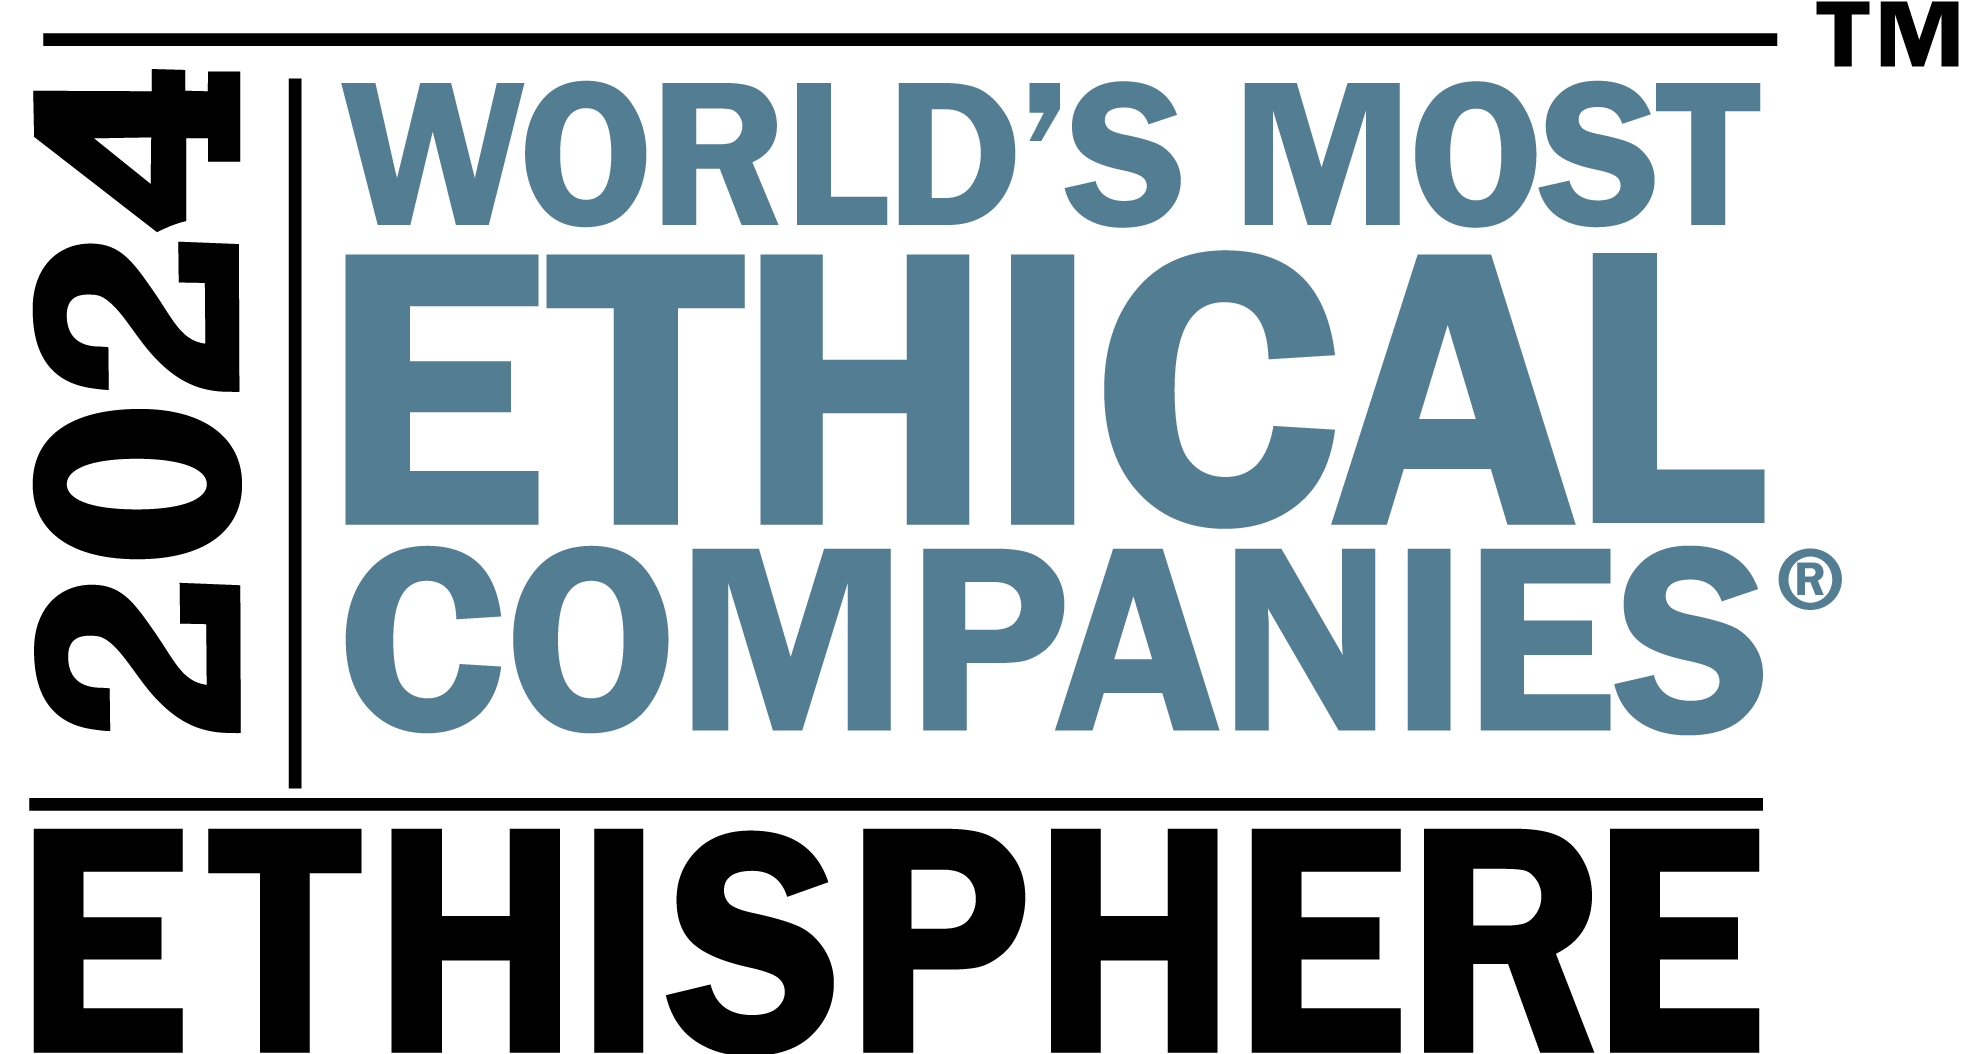 World’s Most Ethical Company logo